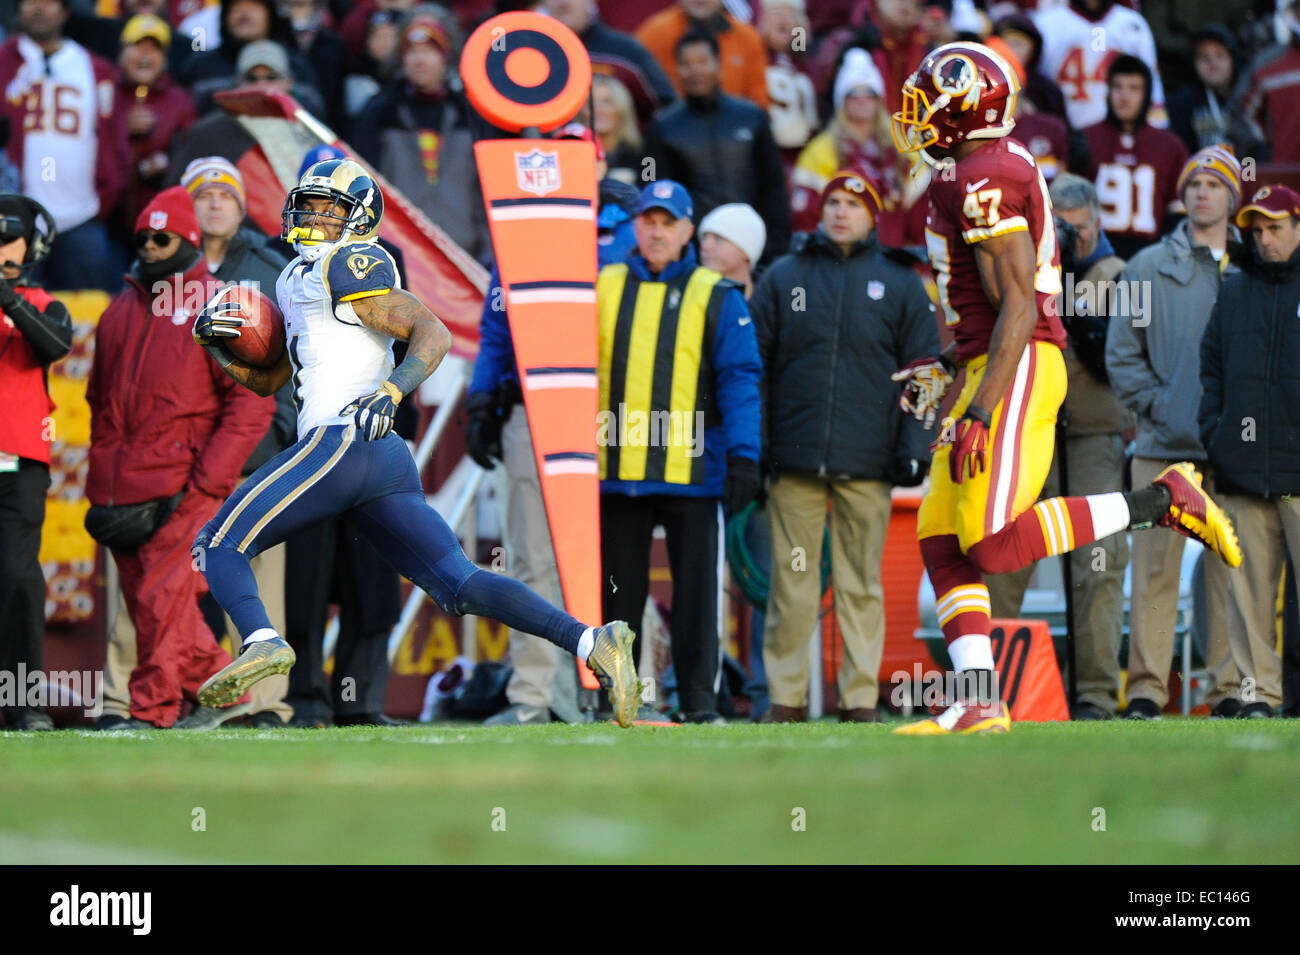 Landover, Maryland, USA. 07th Dec, 2014. St. Louis Rams wide receiver Tavon Austin (11) runs a punt back all the way for a touchdown during the matchup between the St. Louis Rams and the Washington Redskins at FedEx Field in Landover, MD. Credit:  Cal Sport Media/Alamy Live News Stock Photo